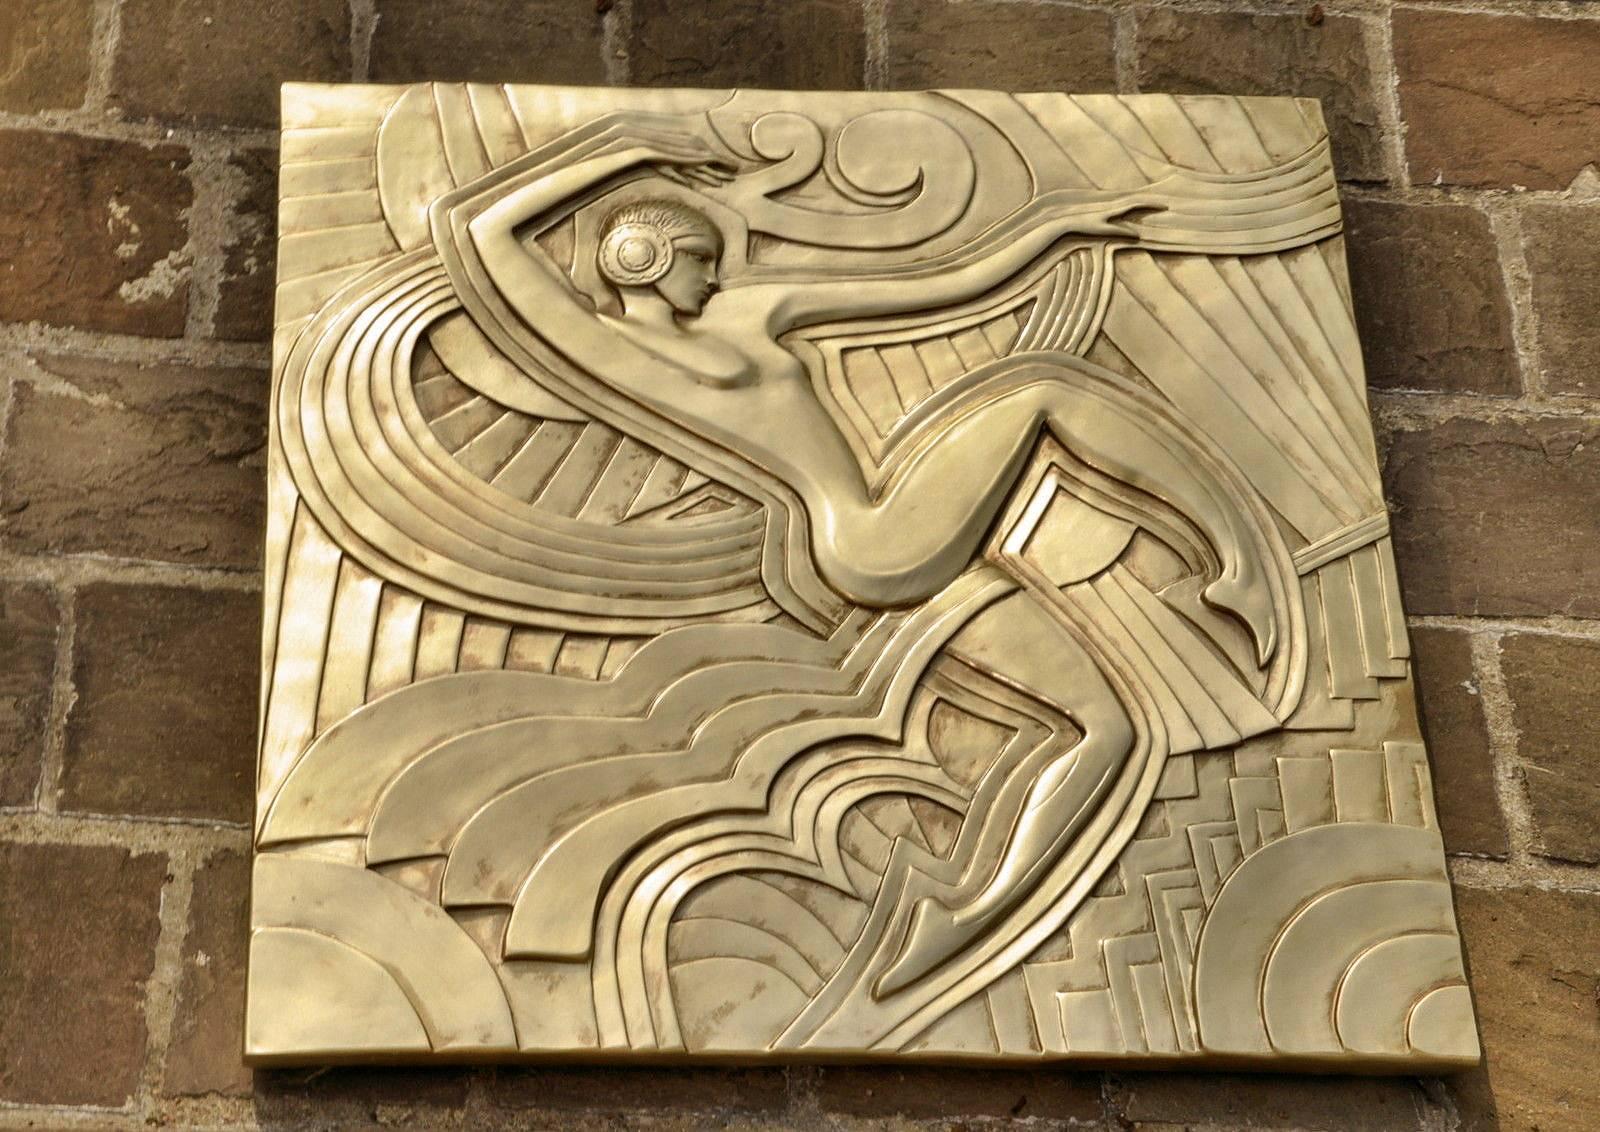 This is a super rare opportunity to acquire one of these beautifully reduced versions of the facade bas-relief of the Folies-Bergeres cabaret by Maurice Picaud aka Pico (1900-1977). 
He was a French architect, interior designer and one time